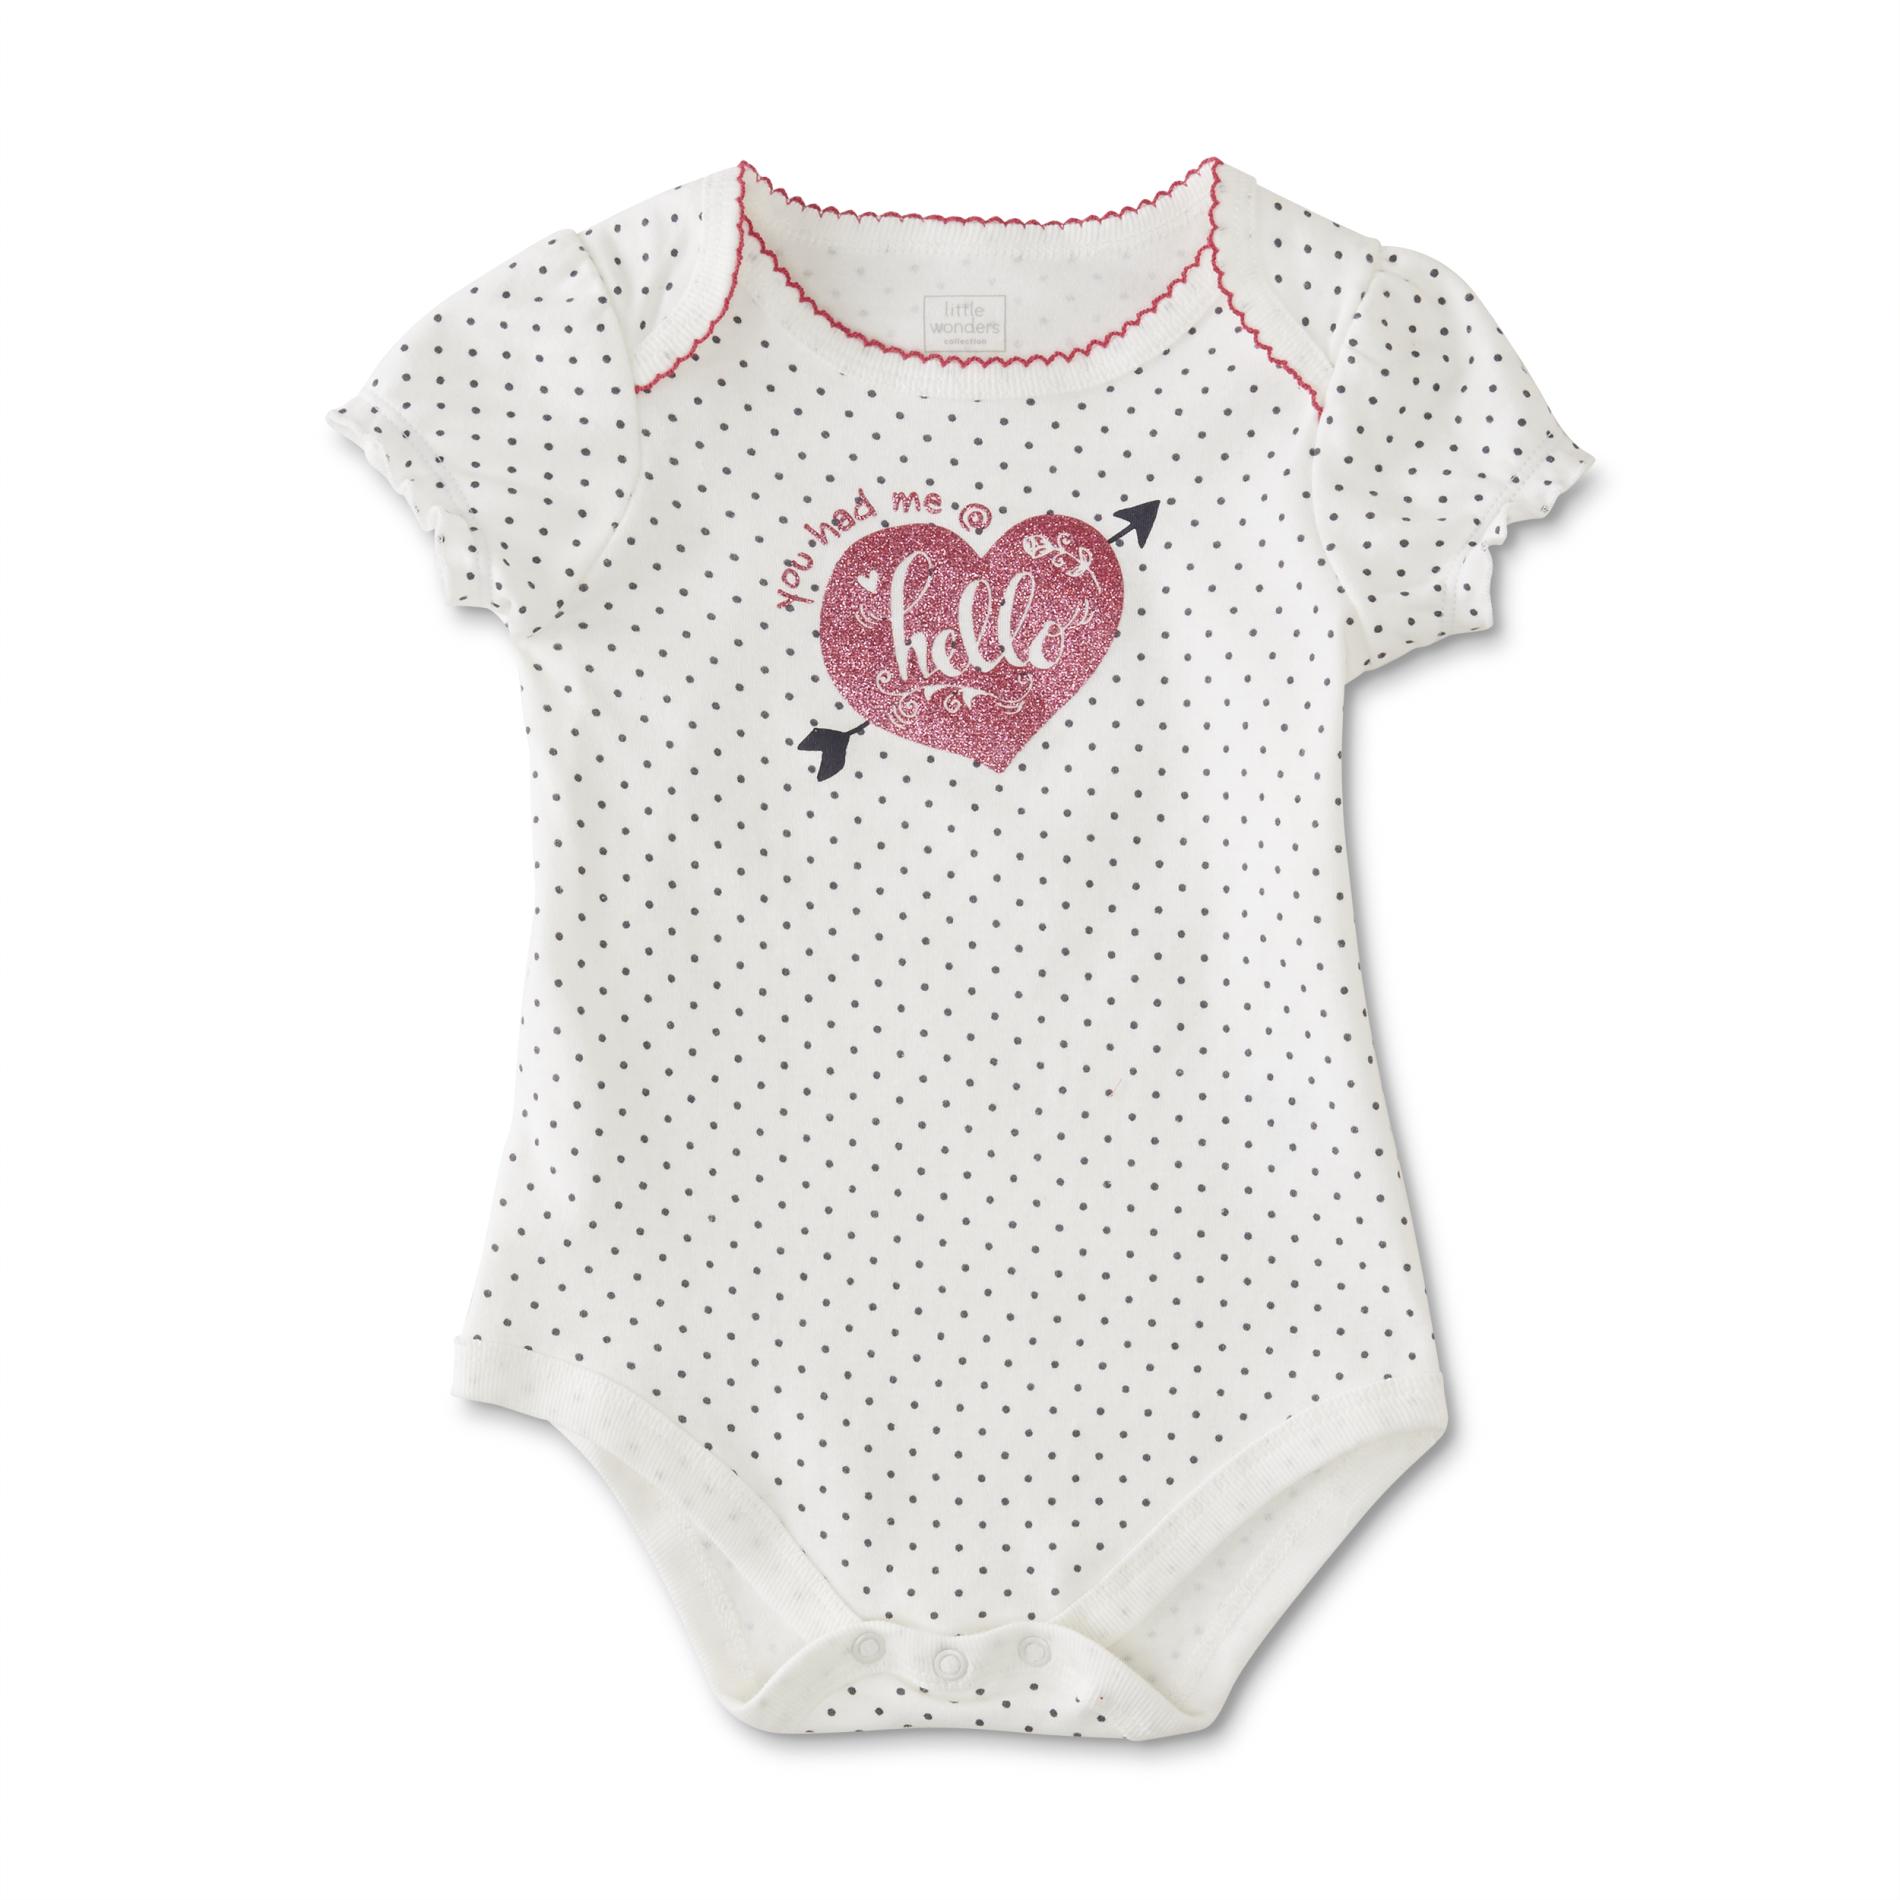 Little Wonders Infant Girls' Graphic Bodysuit - You Had Me at Hello